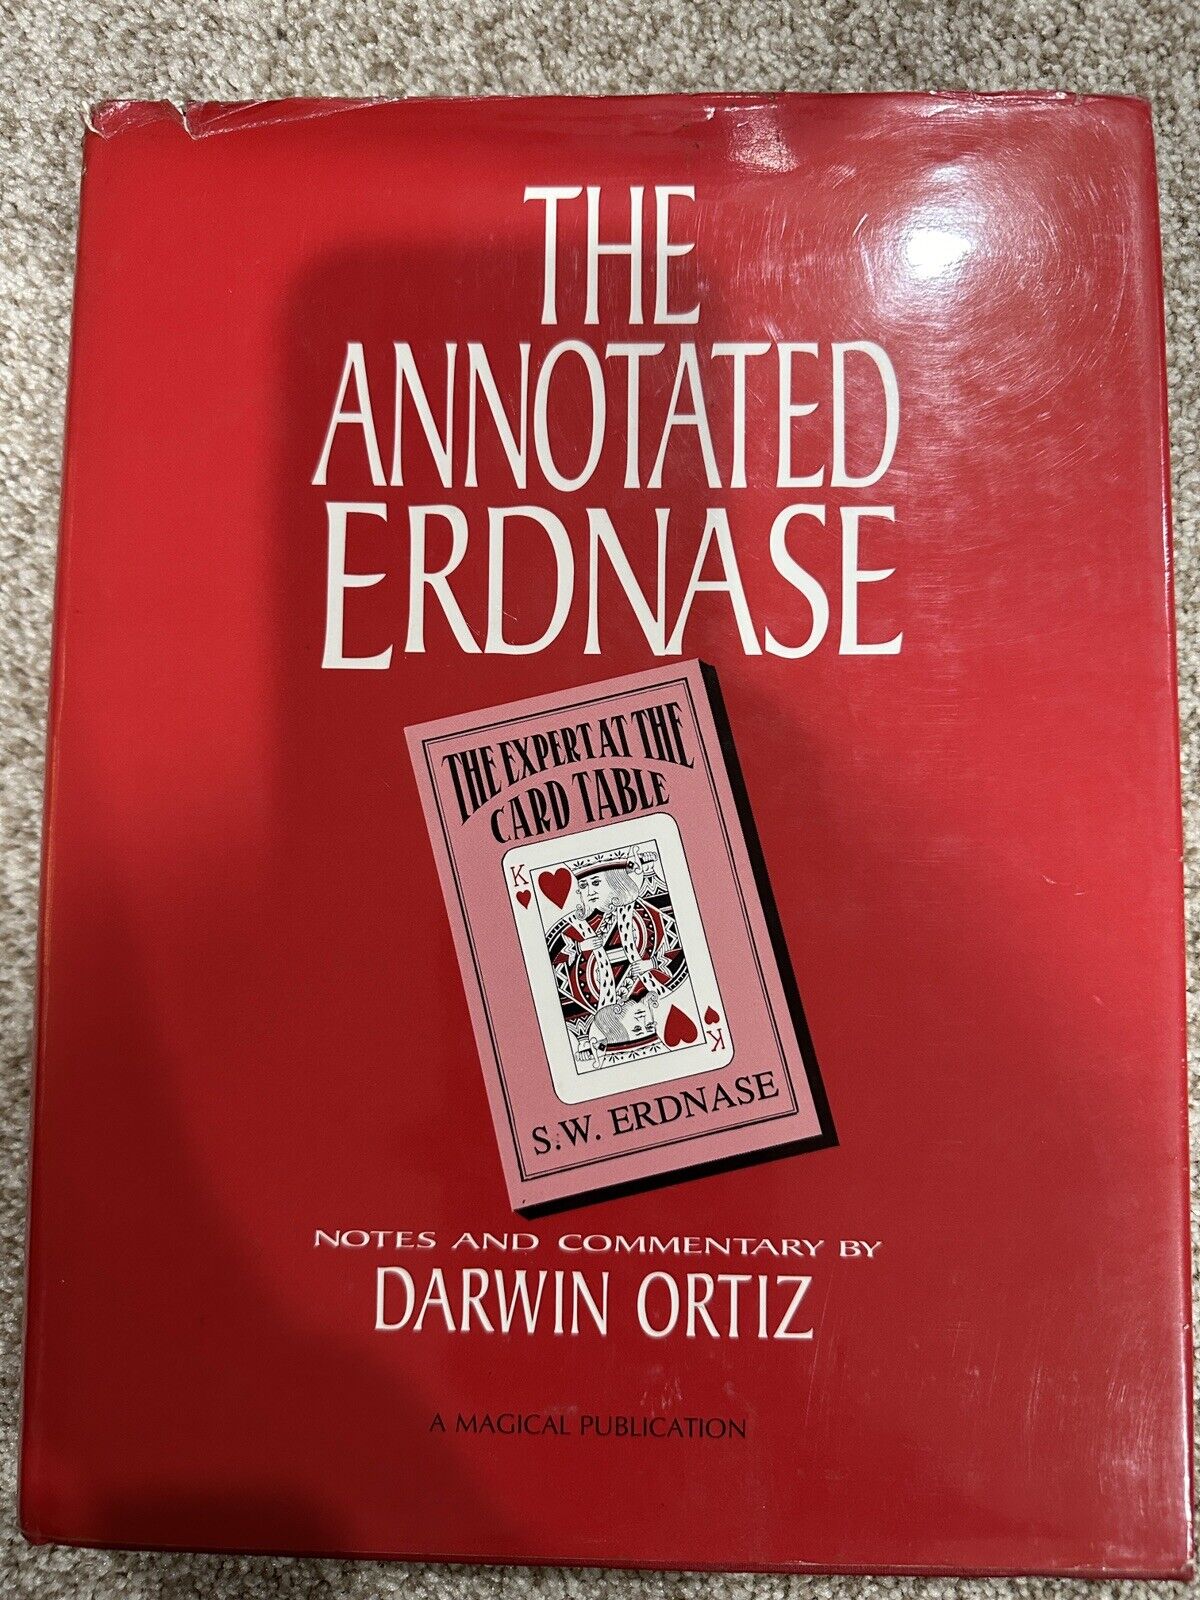 The Annotated Erdnase by Darwin Ortiz - NEW. Rare Out Of Print Magic Book . Buy